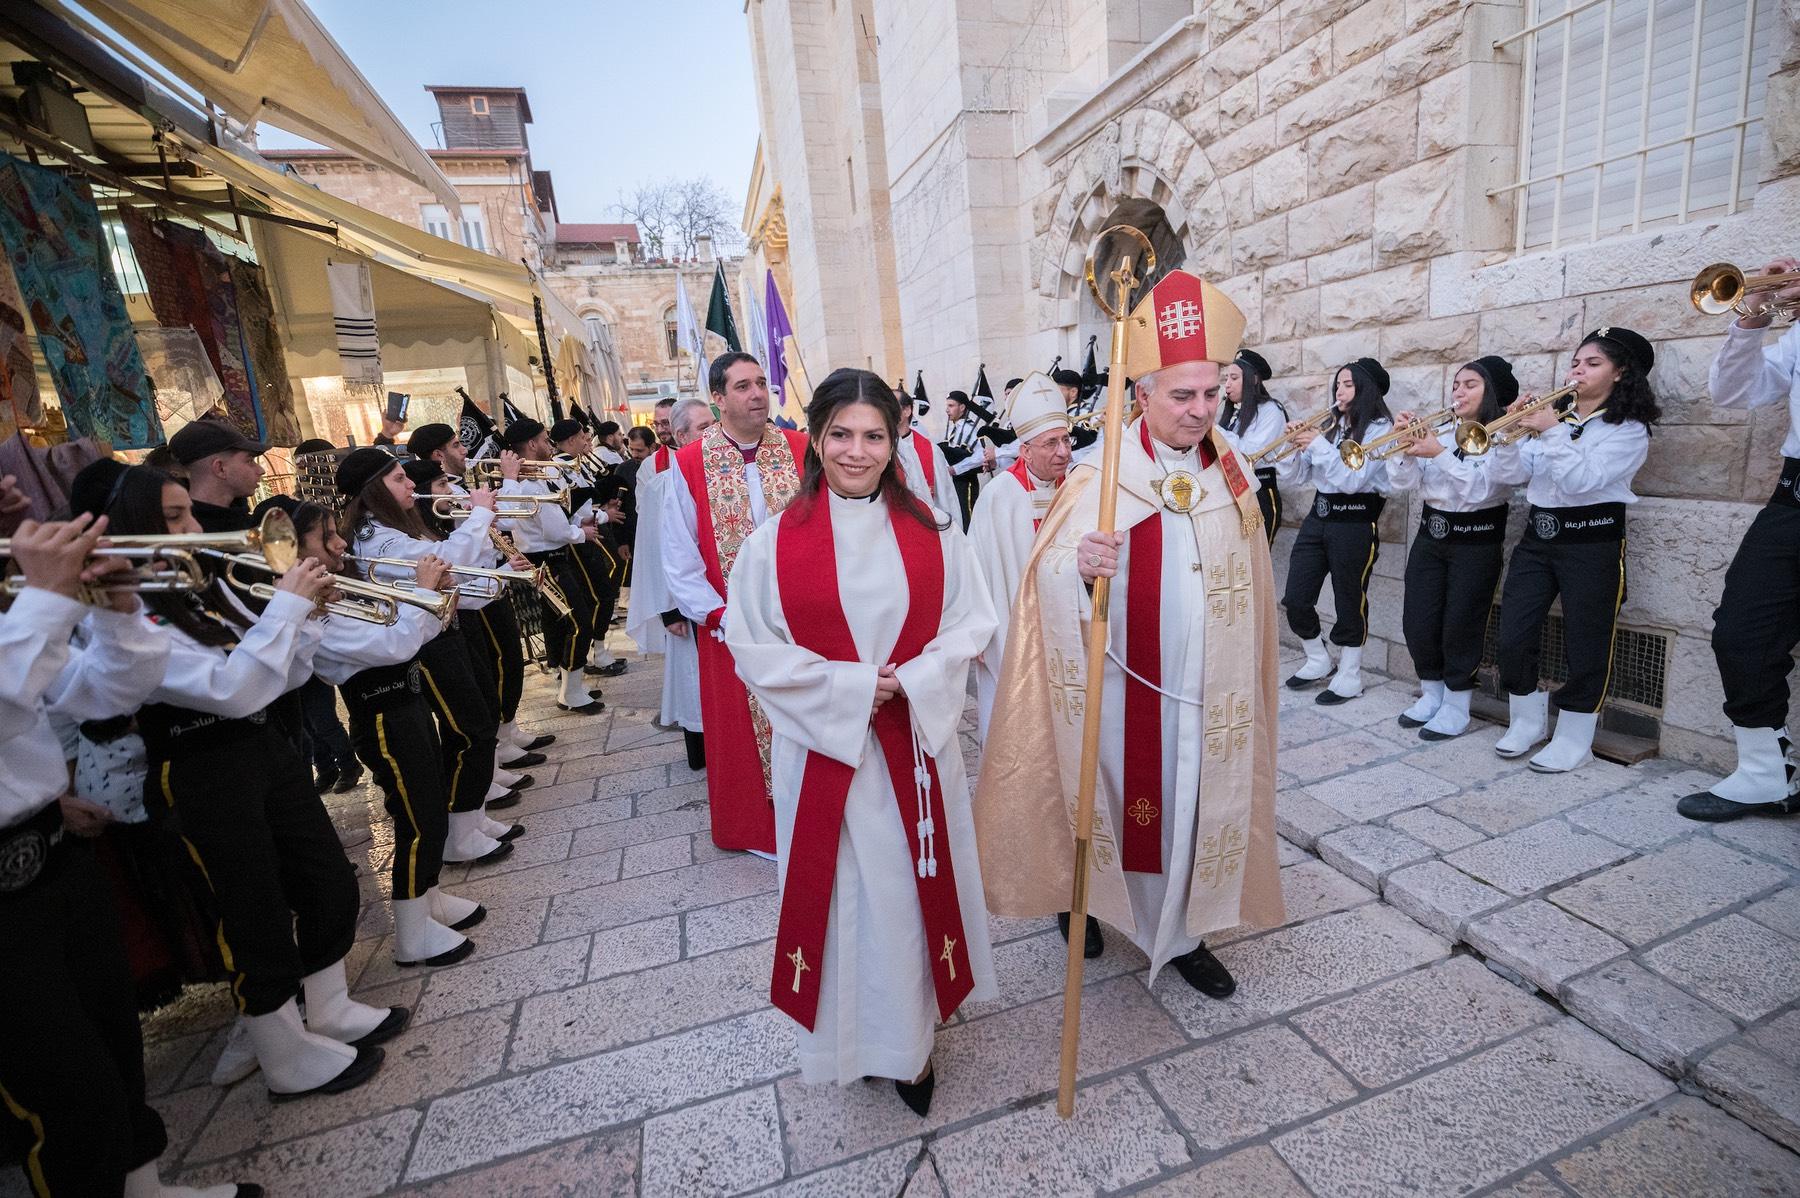 22 January 2023, Jerusalem, Palestine: Rev. Sally Azar, ordained minutes earlier as pastor in the Evangelical Lutheran Church in Jordan and the Holy Land, exits the church in procession together with her Bishop Sani Ibrahim "Barhoum" Azar. Photo: LWF/ Albin